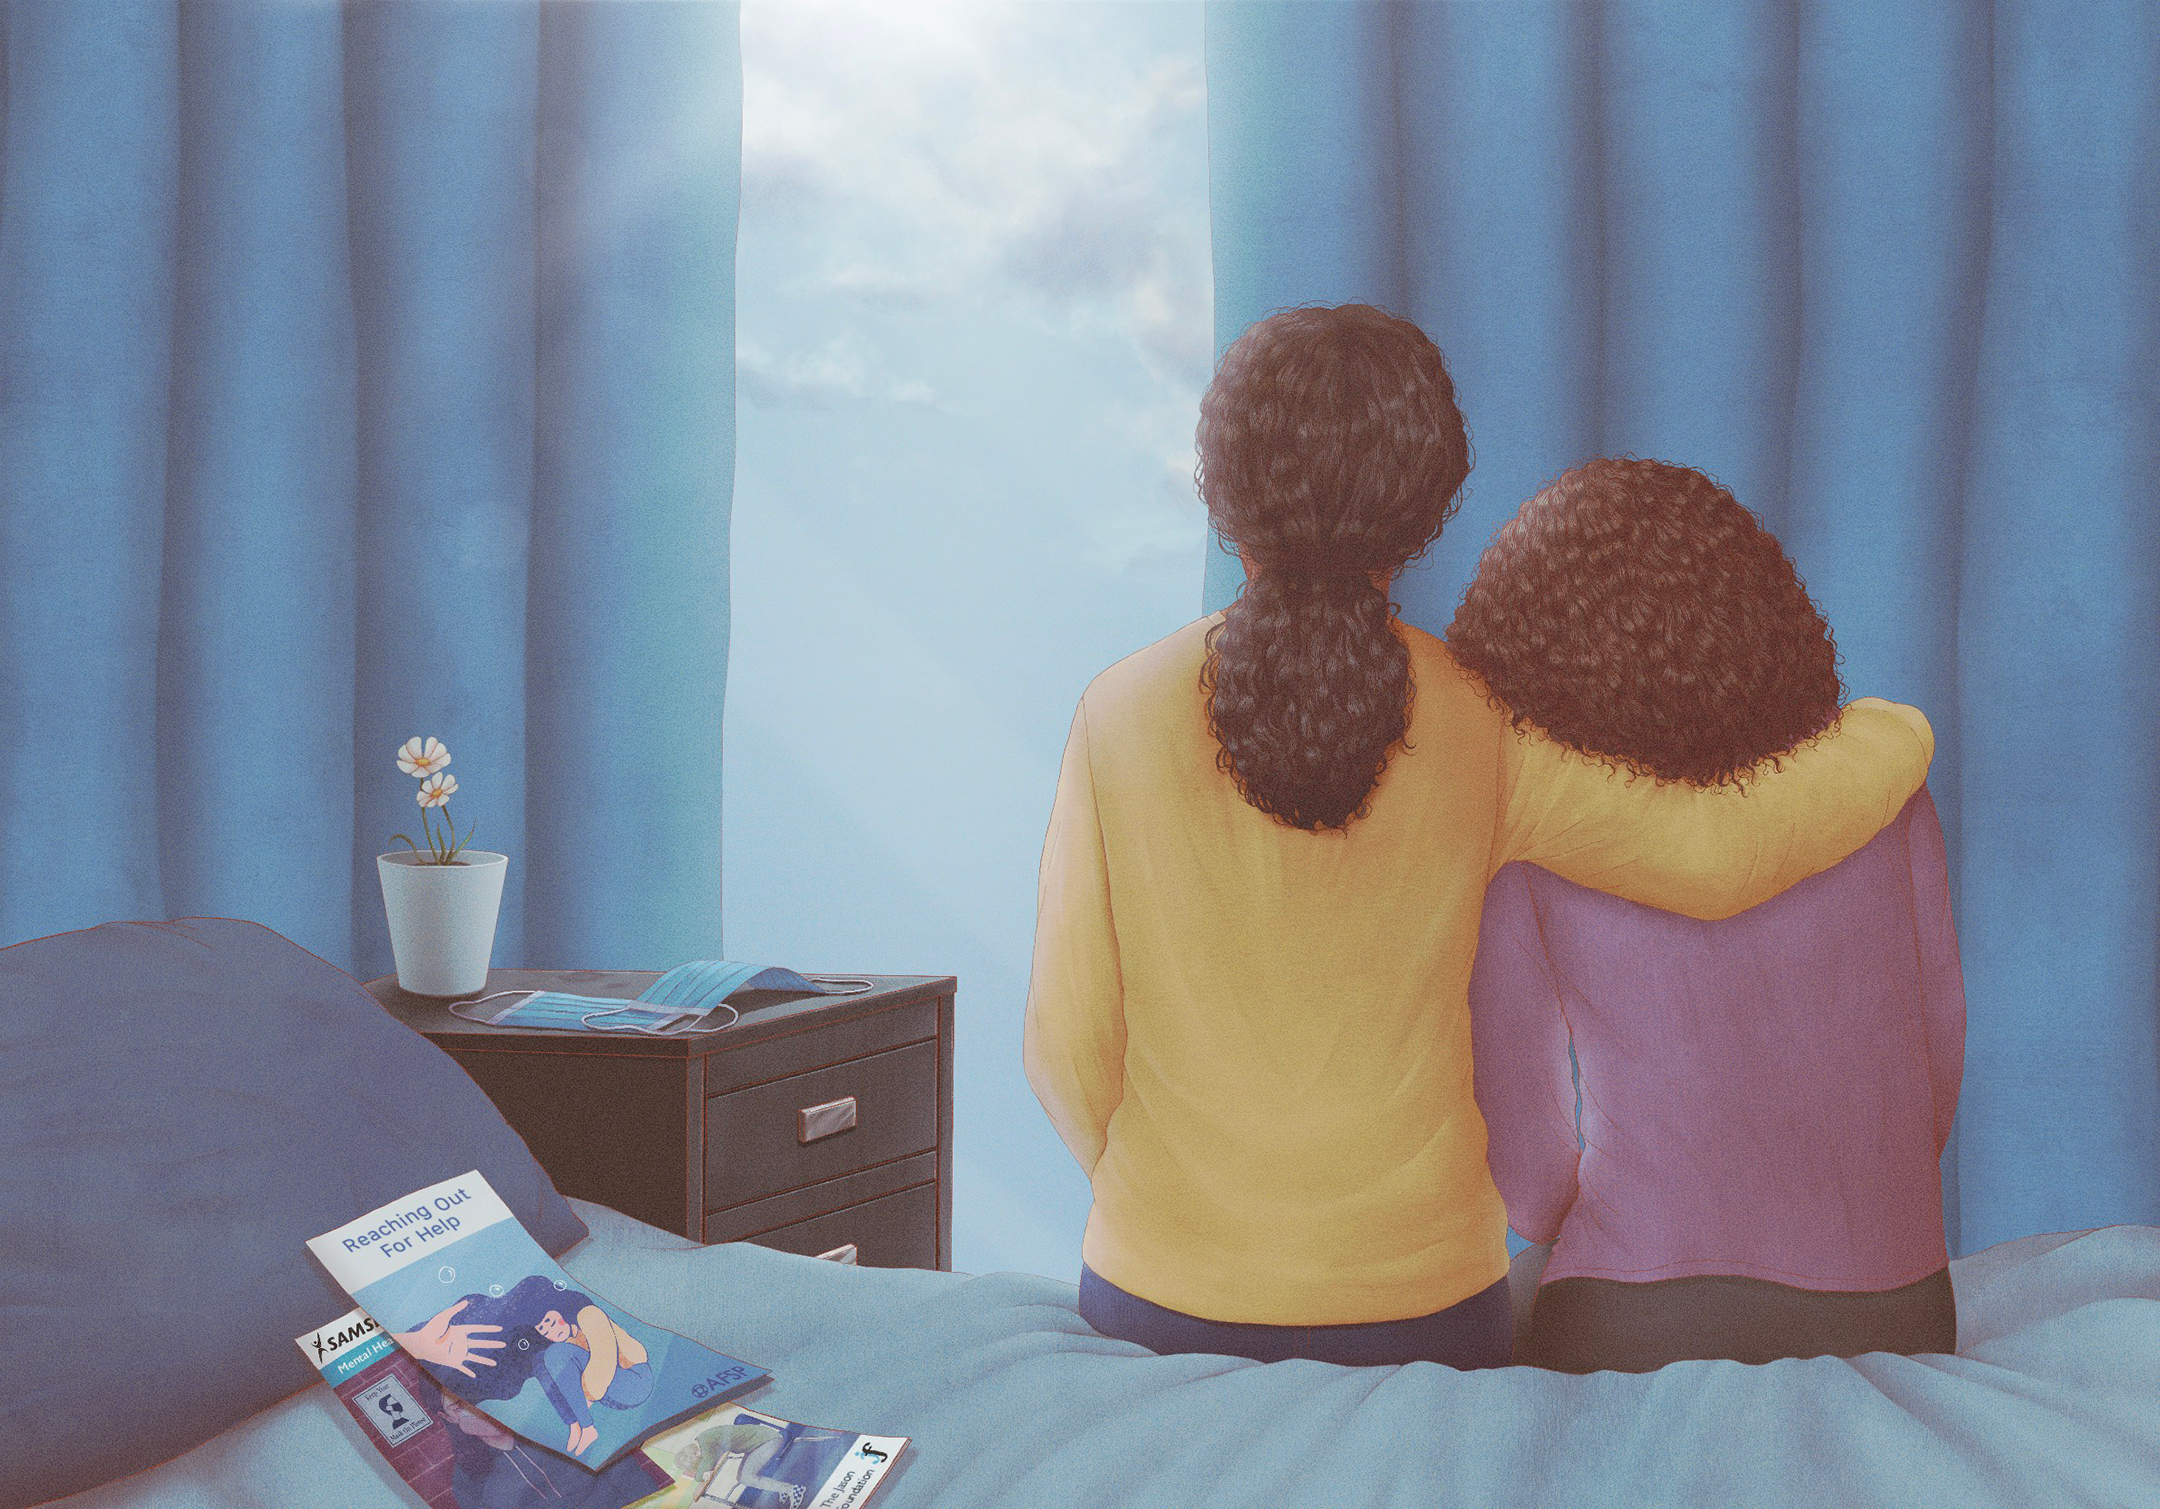 Illustration of a young woman with her arm around an older woman, seen from behind, sitting on a bed as they look out the window